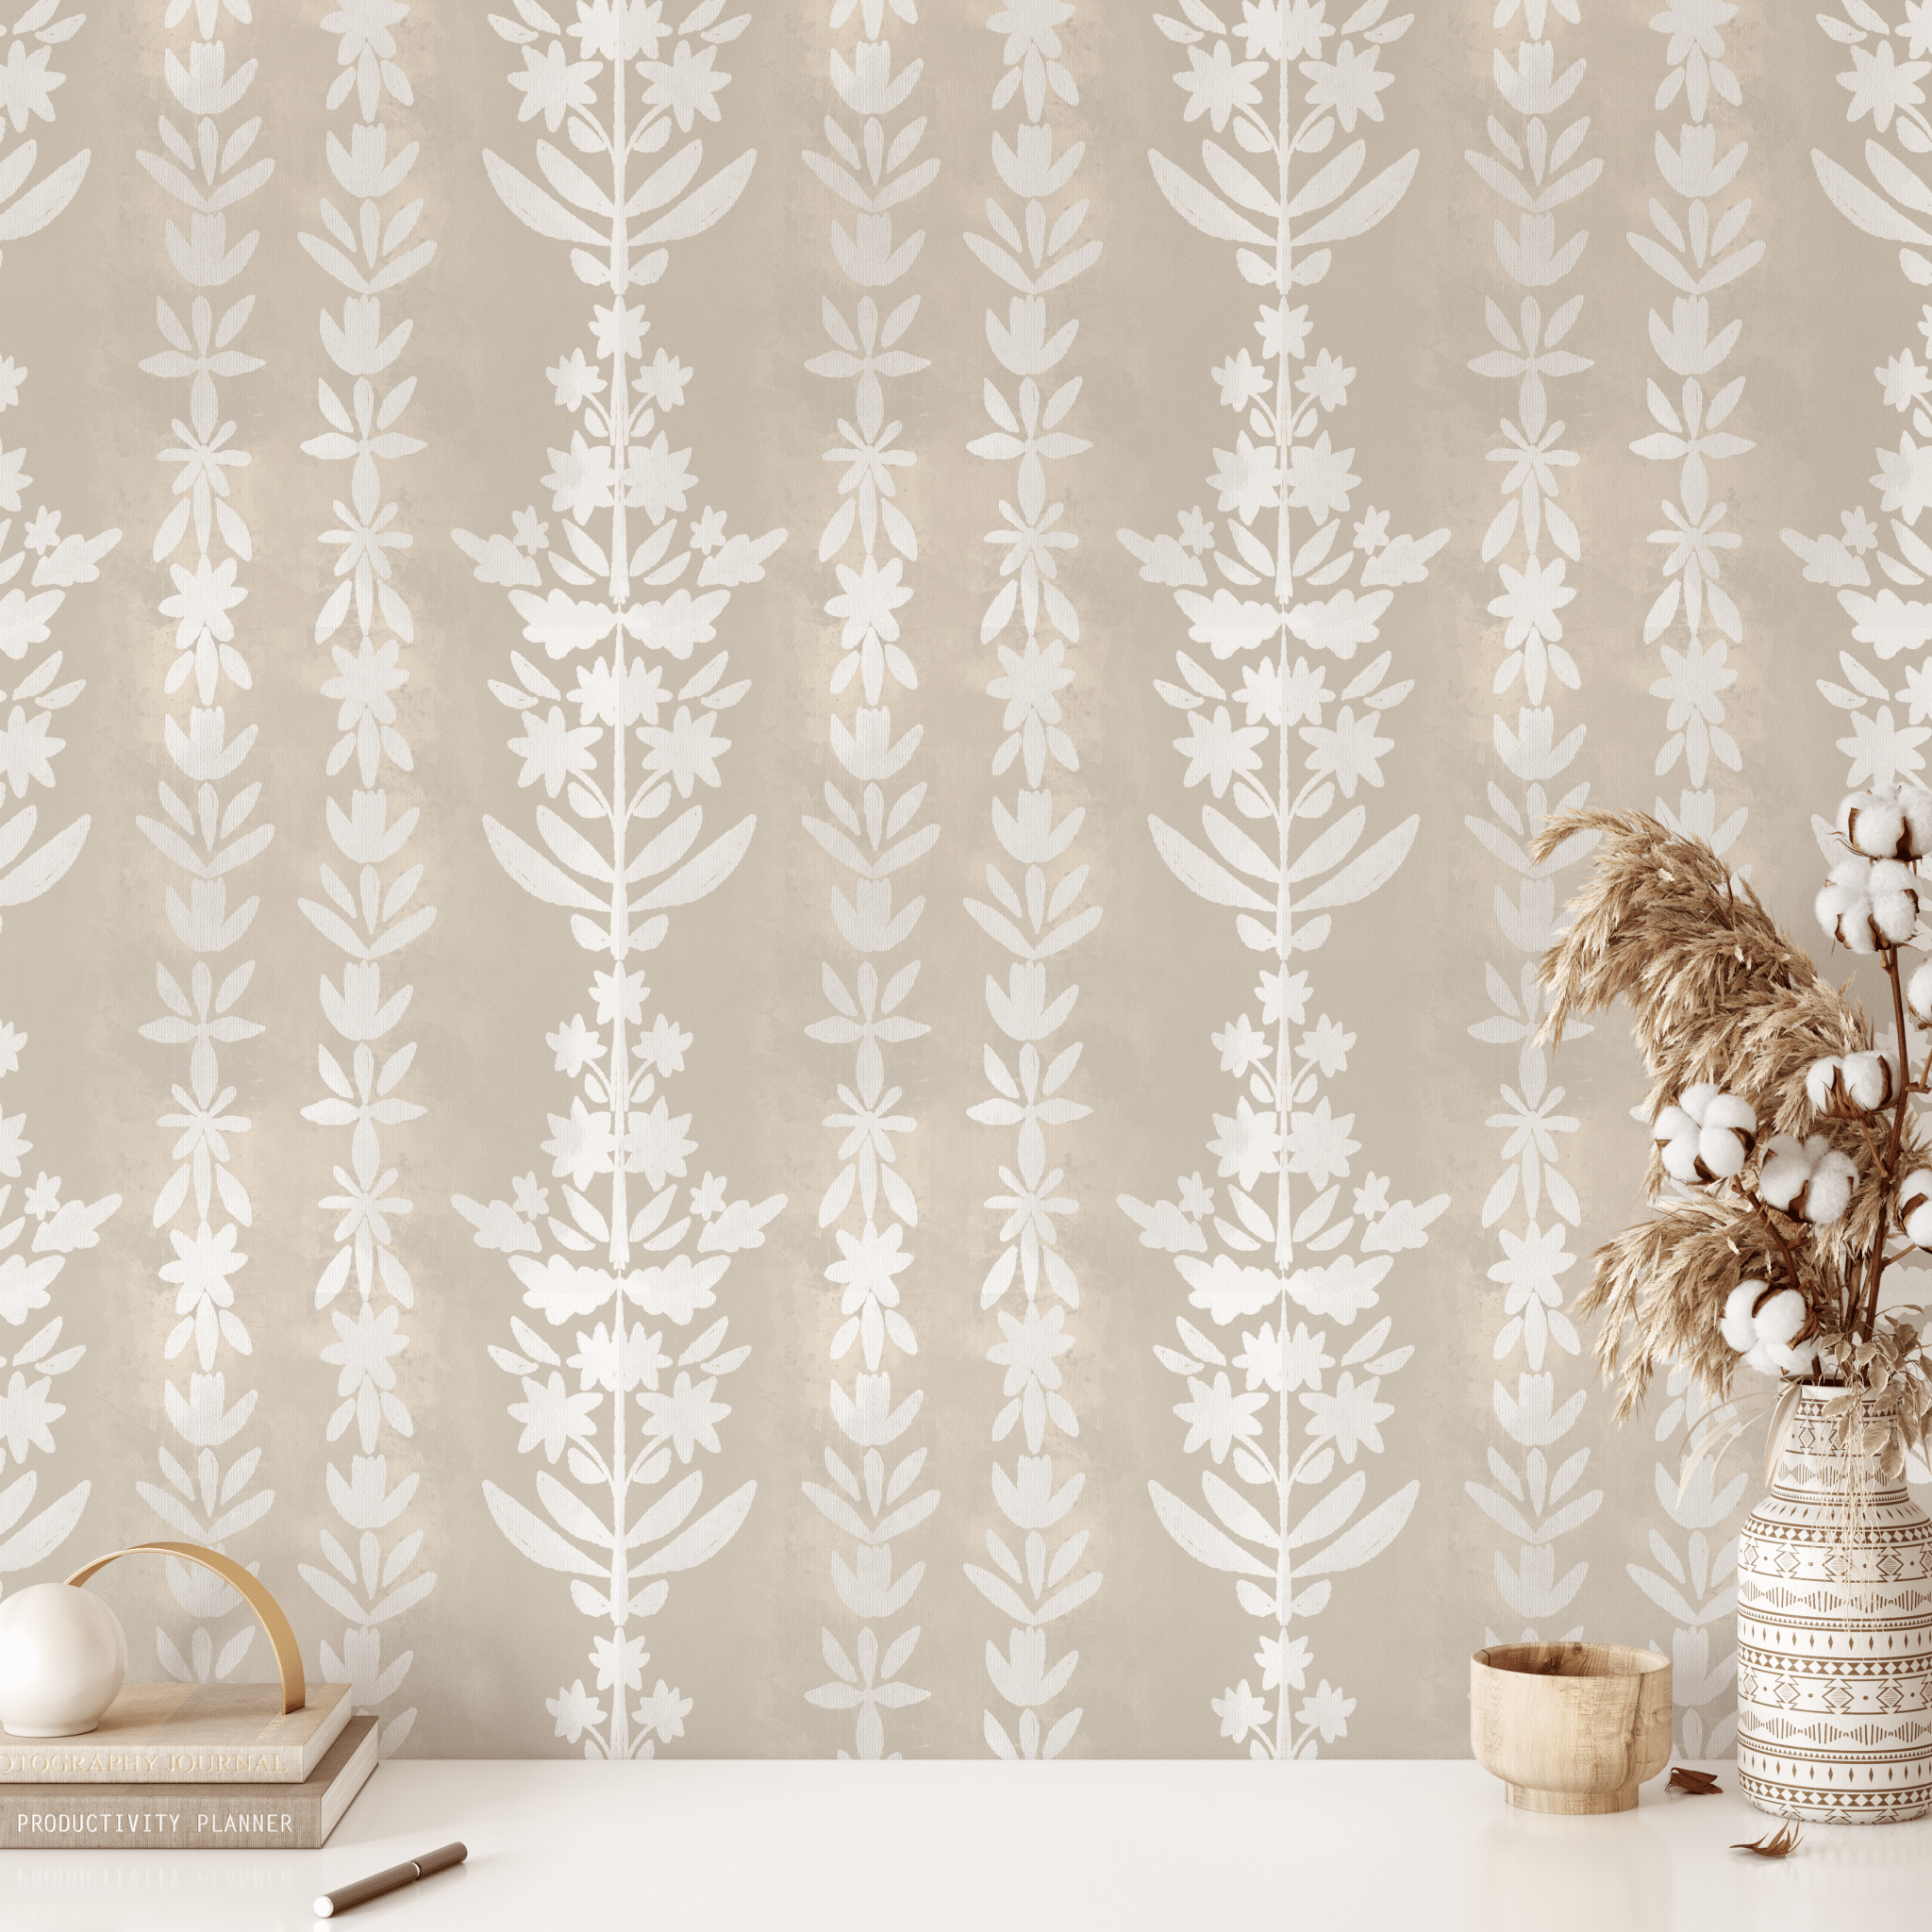 Gold Silver Wallpaper Peel & Stick Removable Contact Paper Self